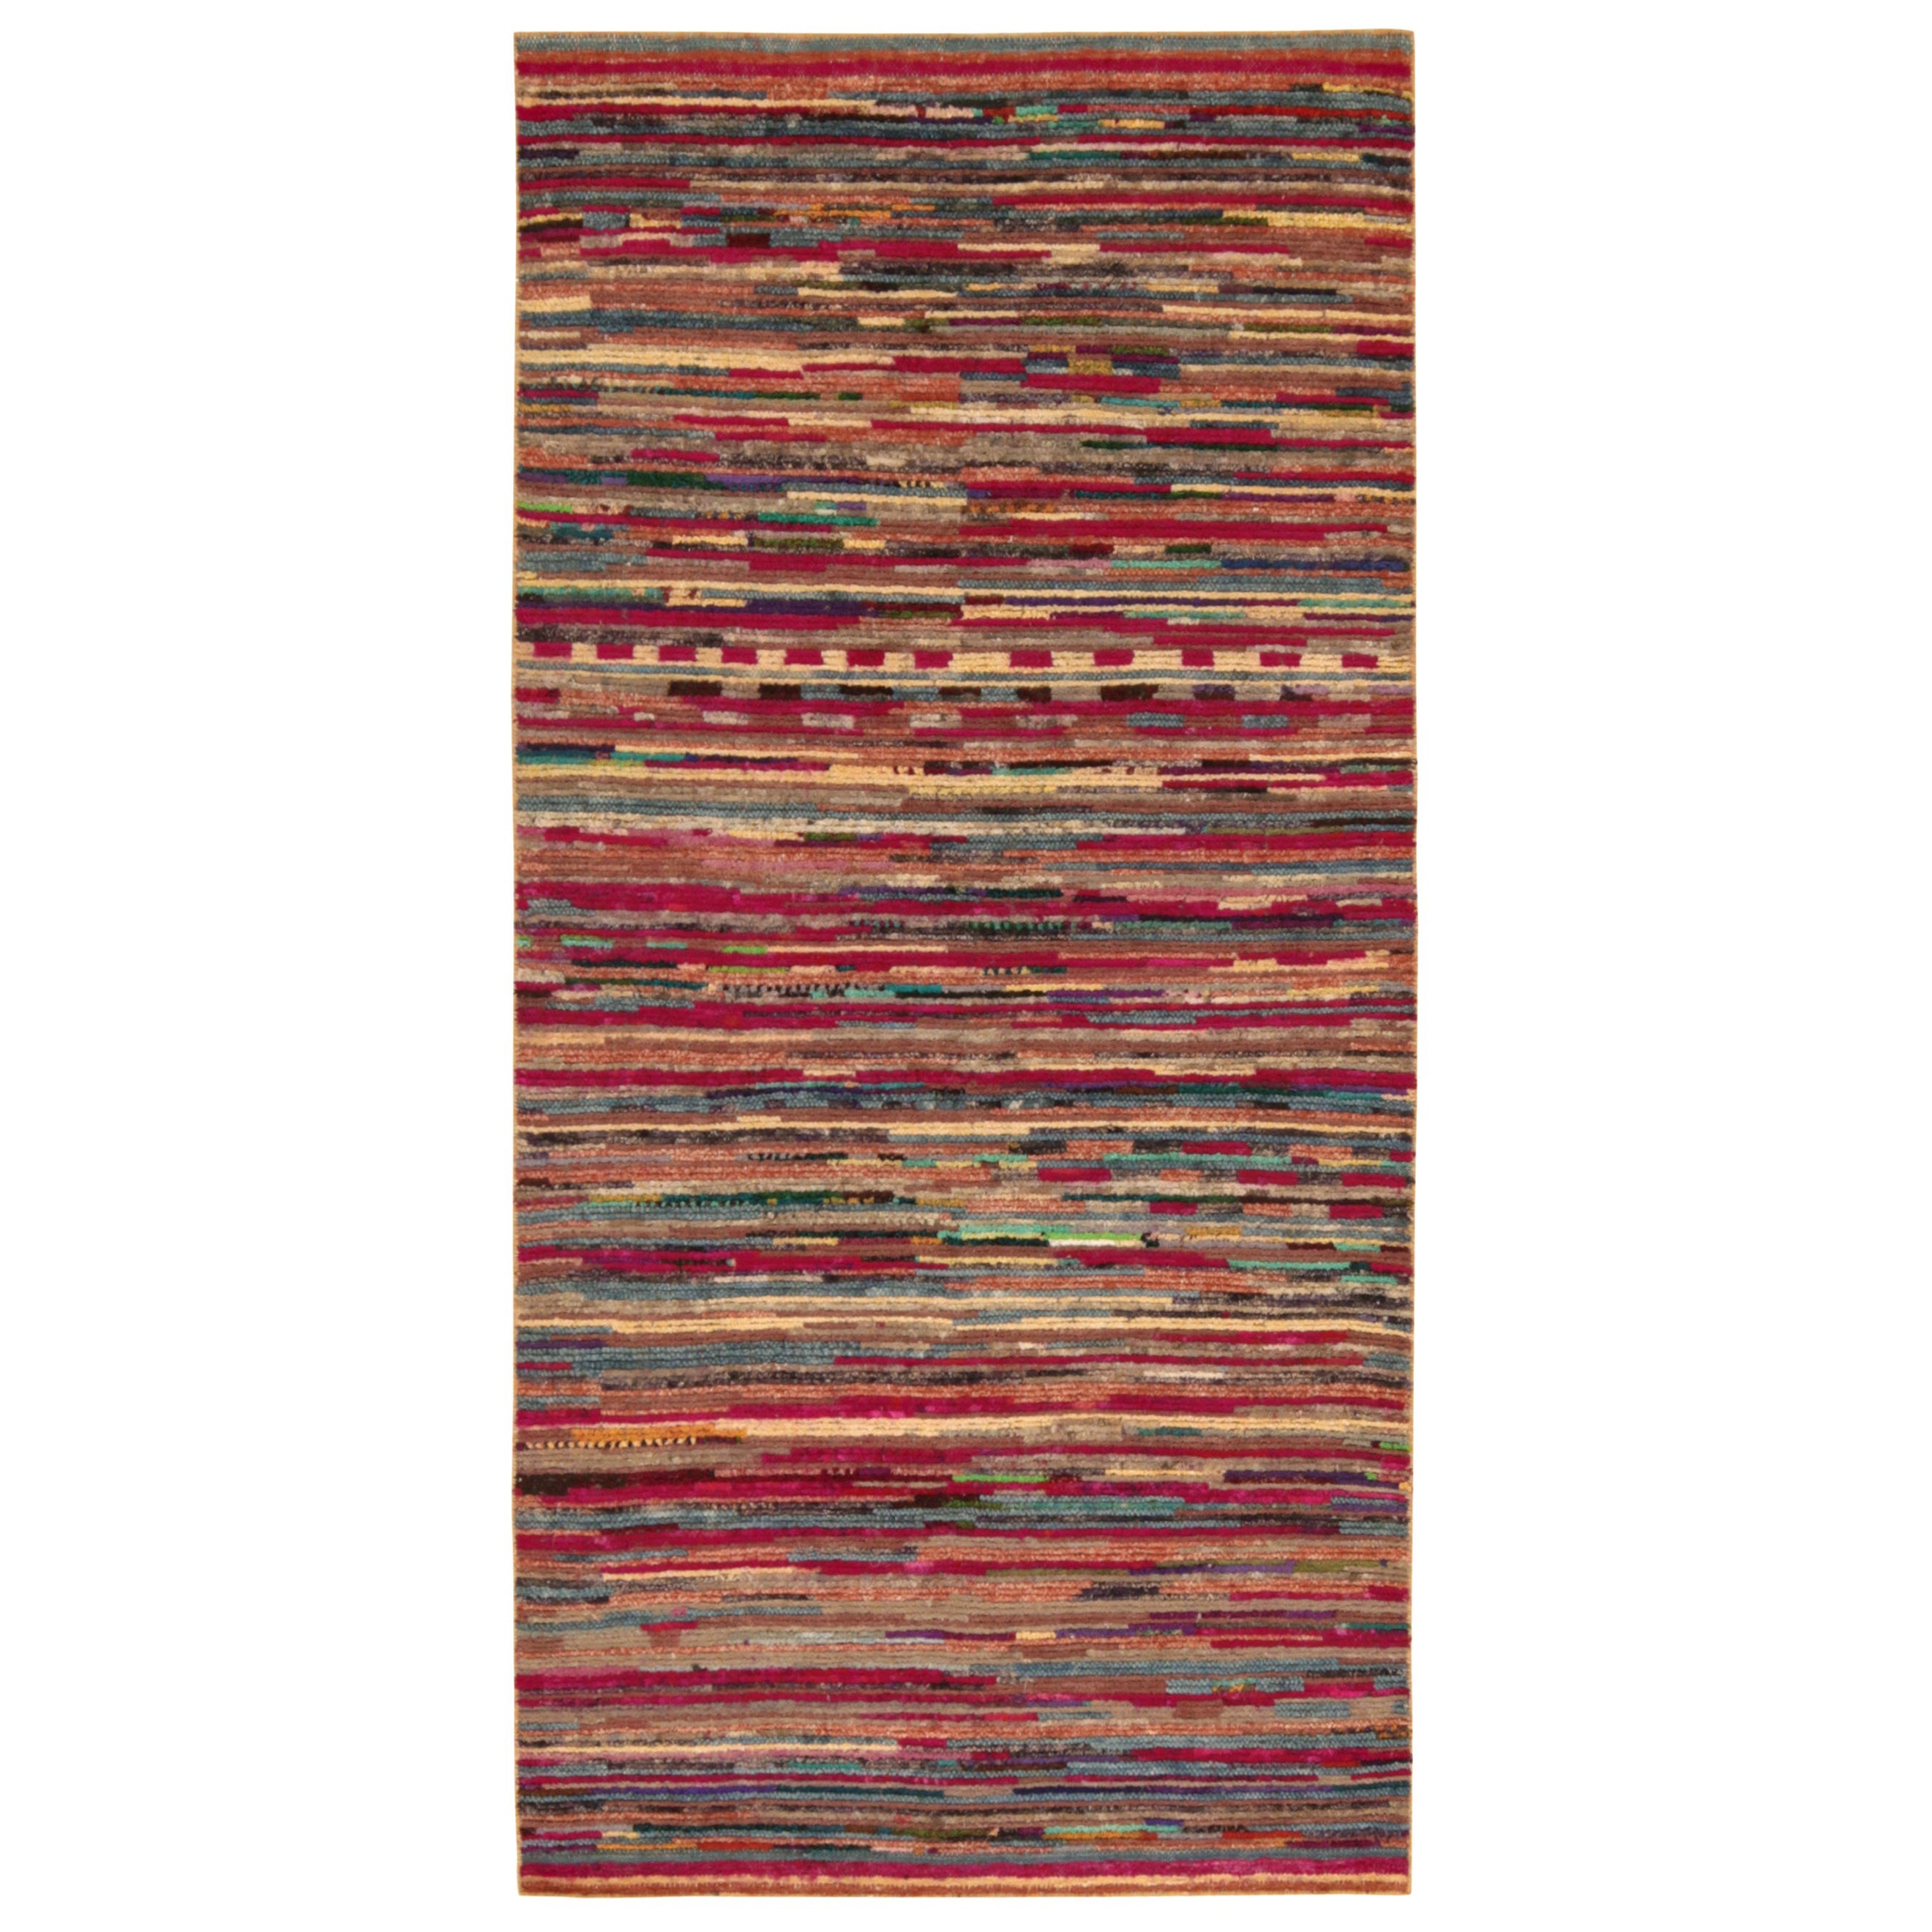 Rug & Kilim’s Moroccan Style Rug in Pink with Vibrant Polychromatic Stripes